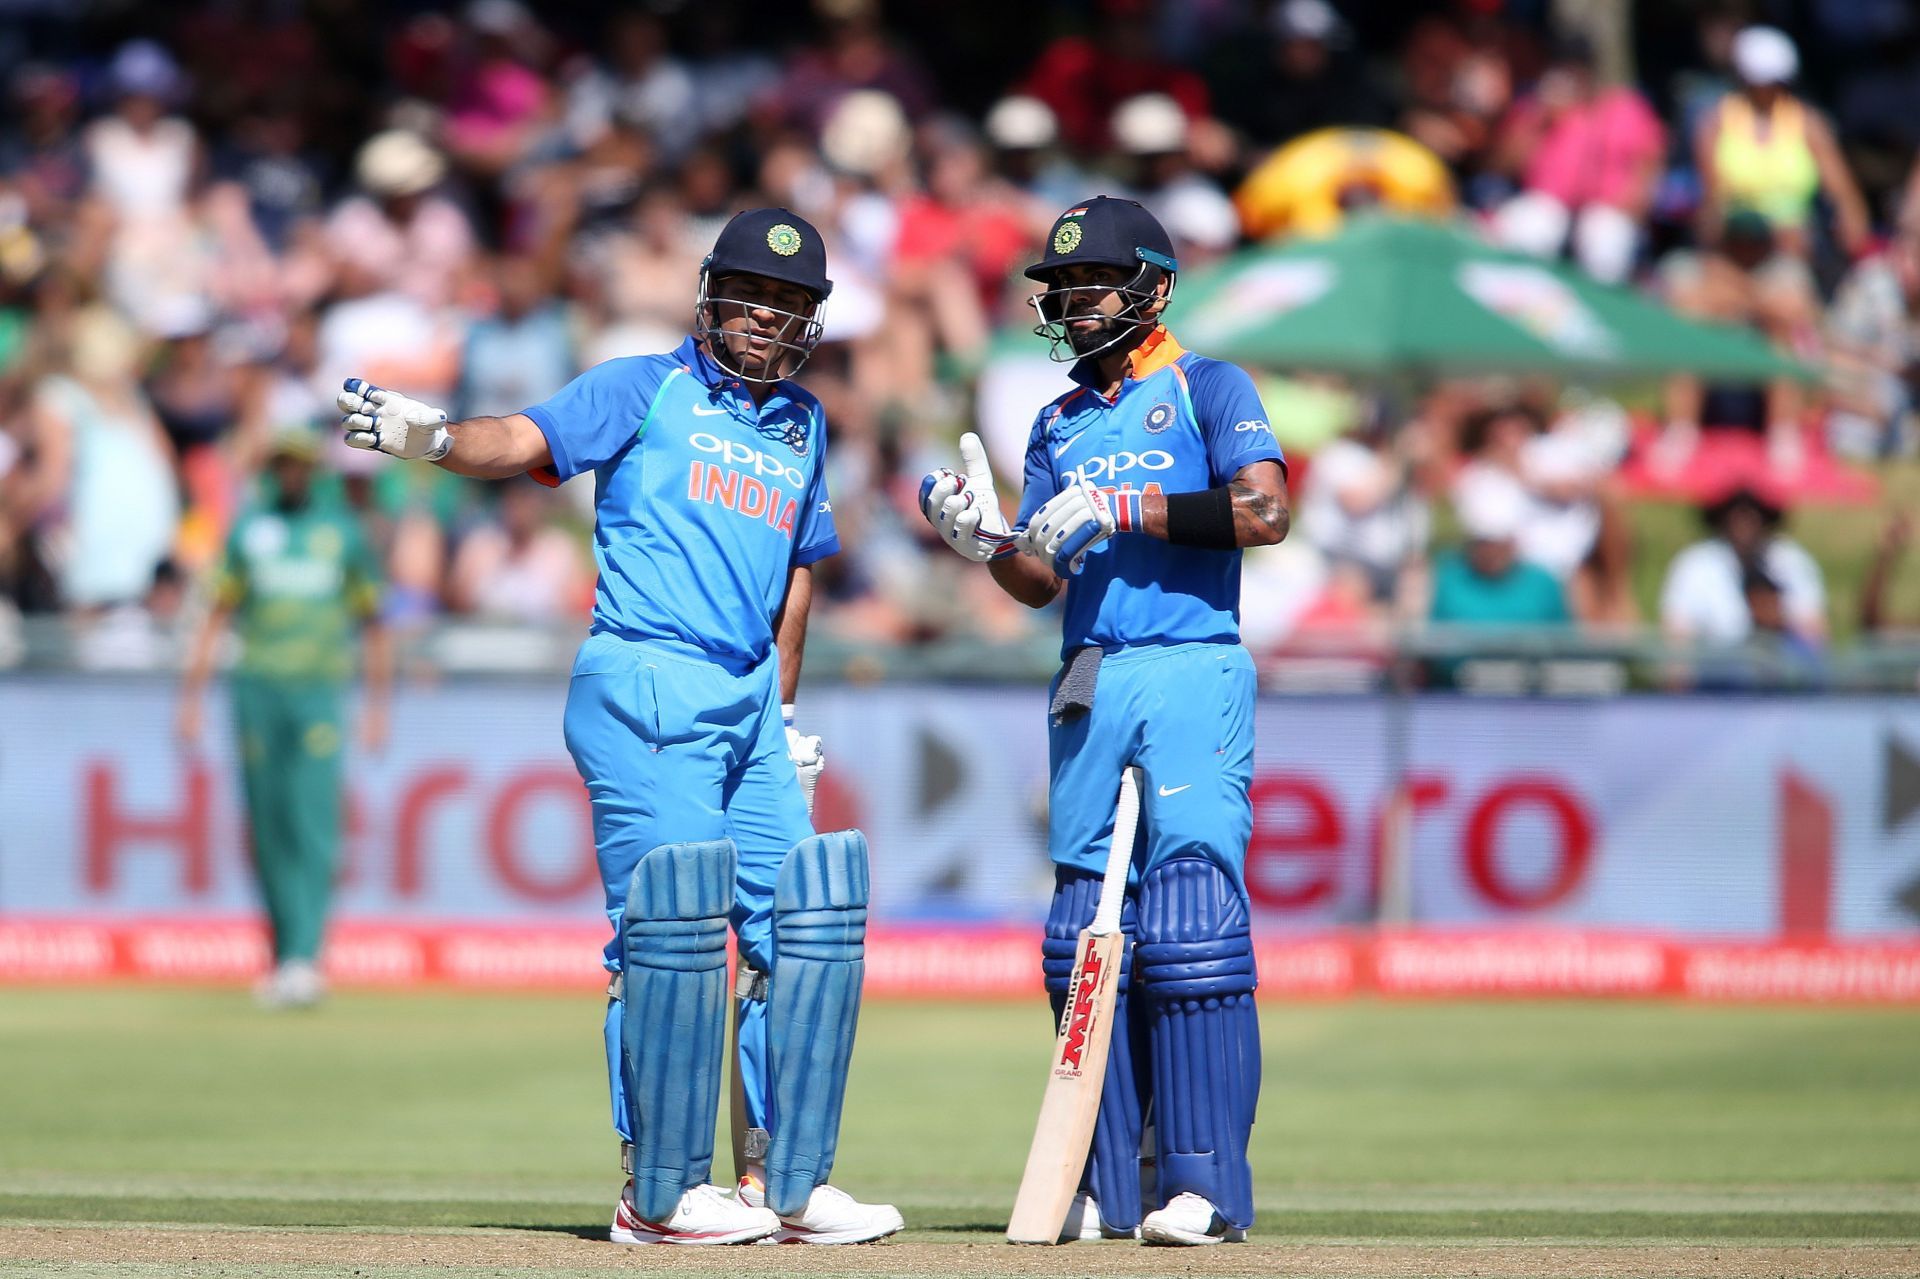 Kohli and Dhoni during the 2018 series in South Africa. Pic: Getty Images